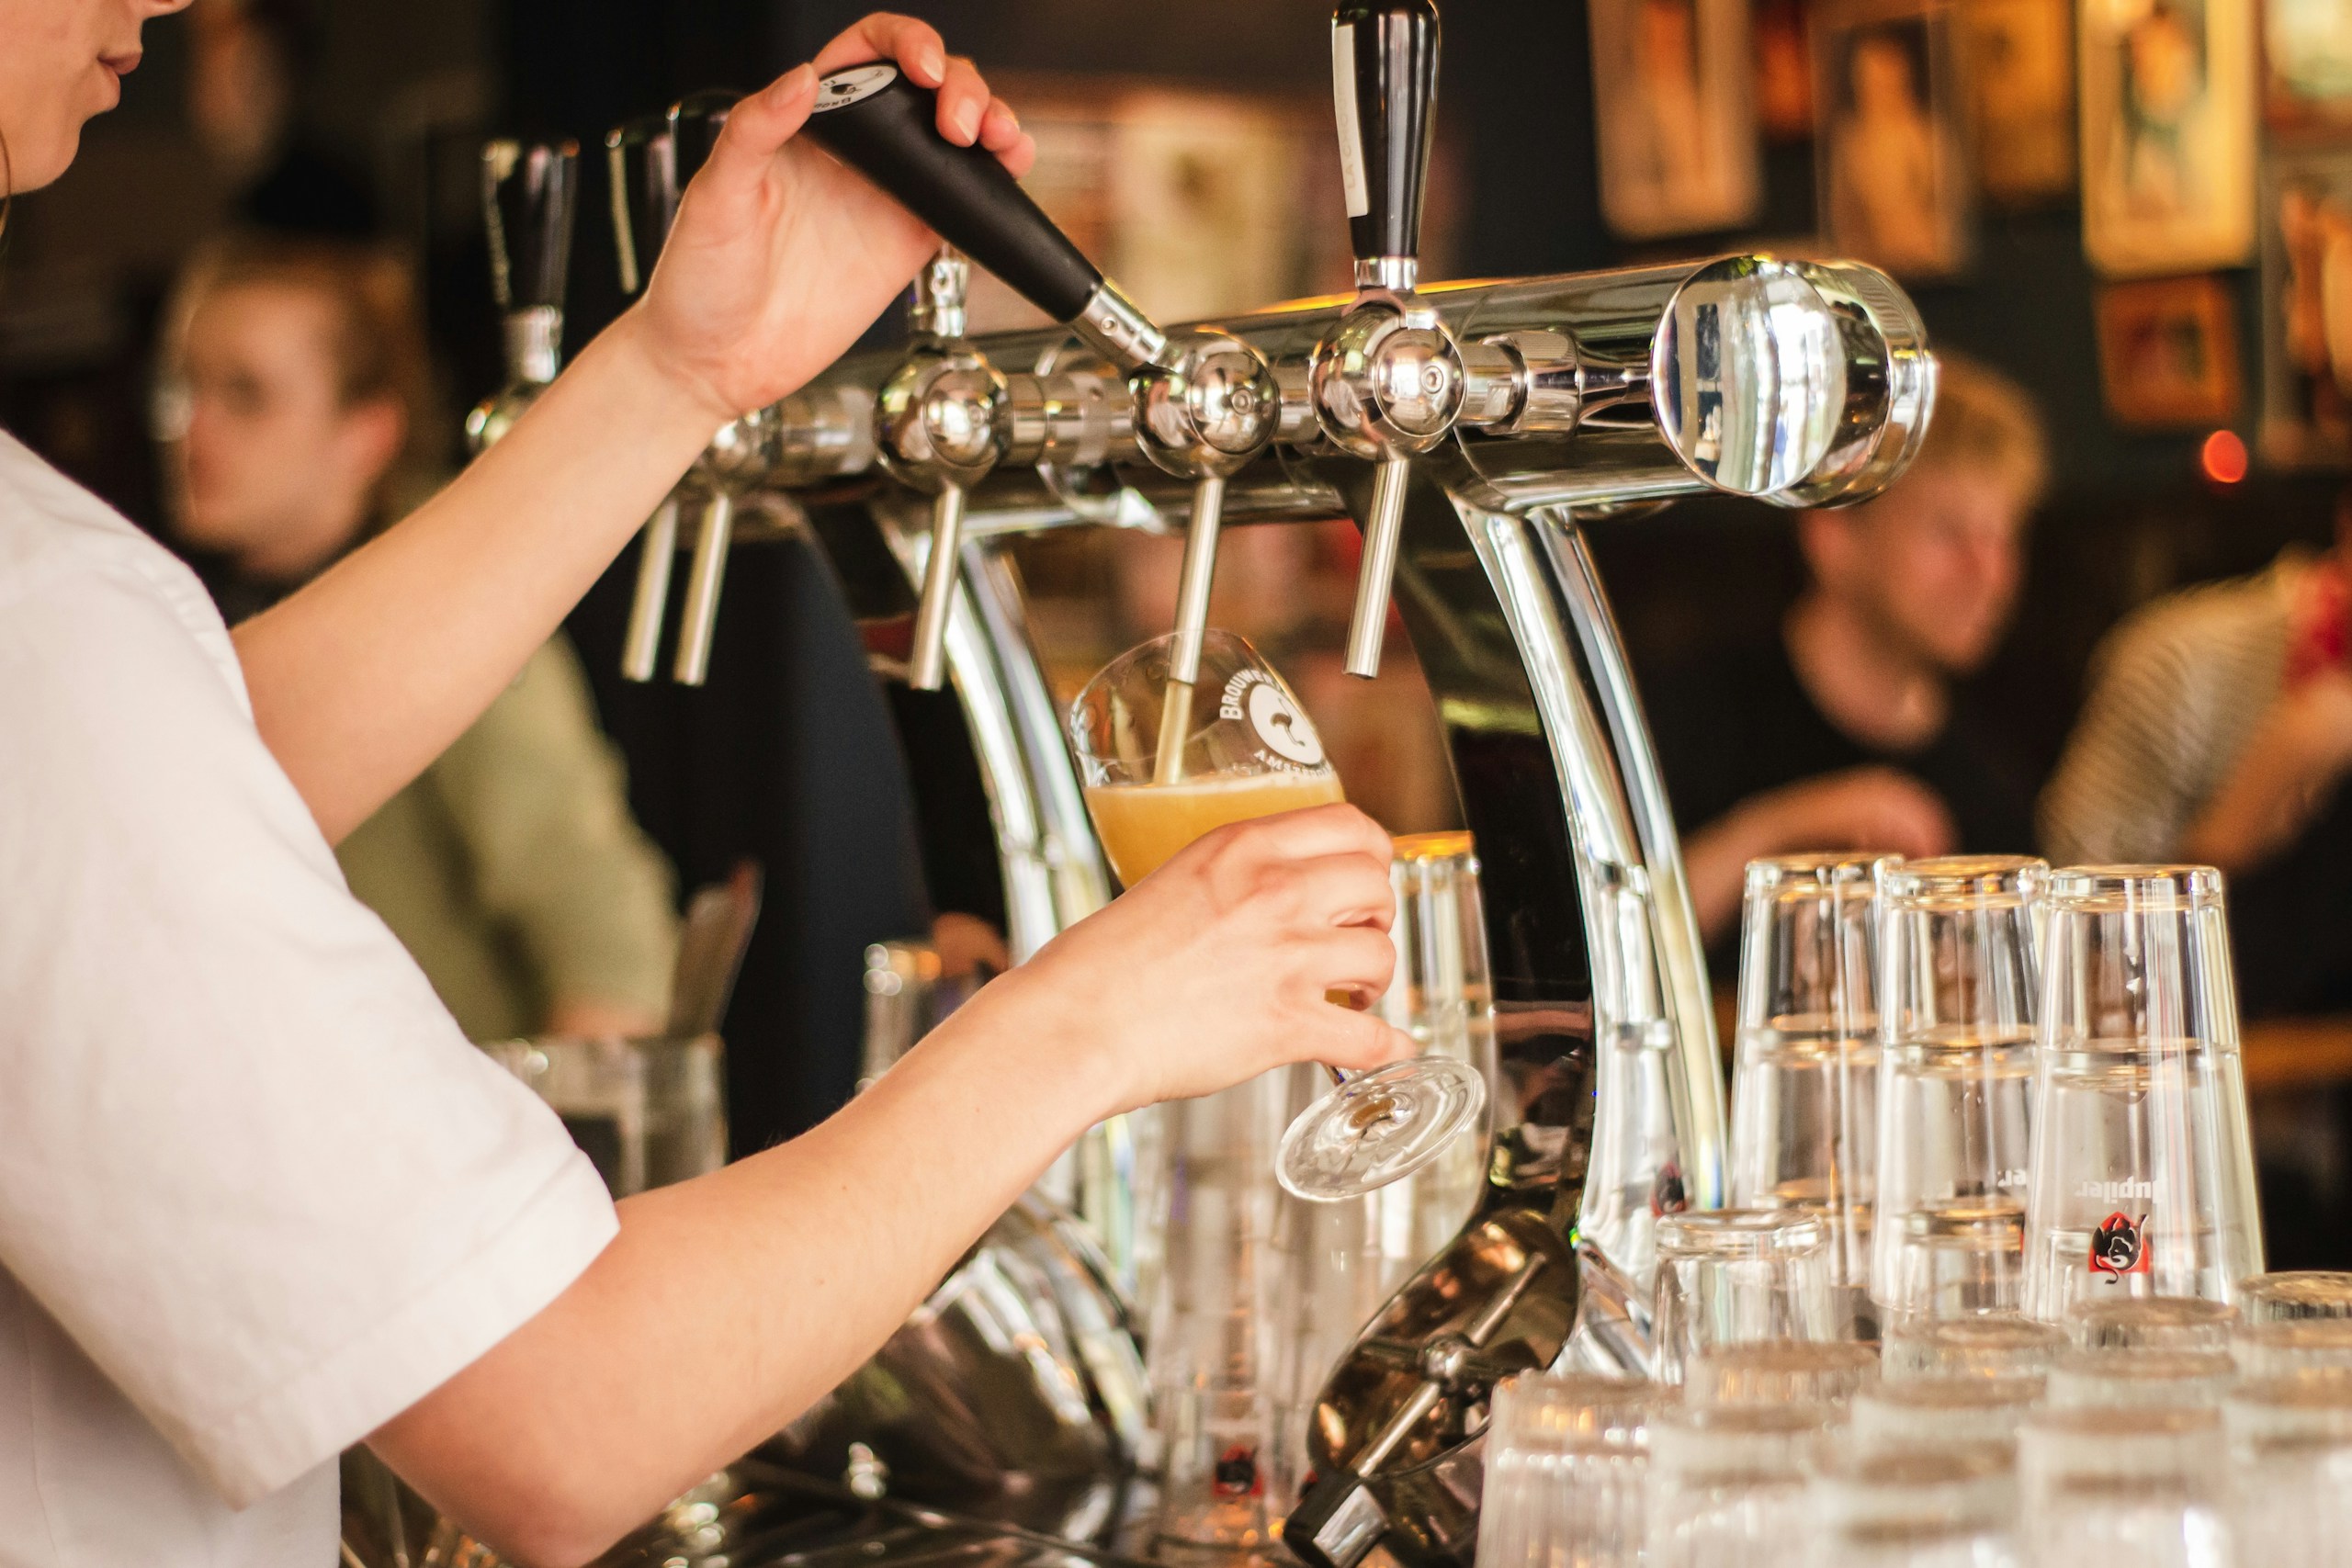 a photo of a person filling a glass from a beer tap